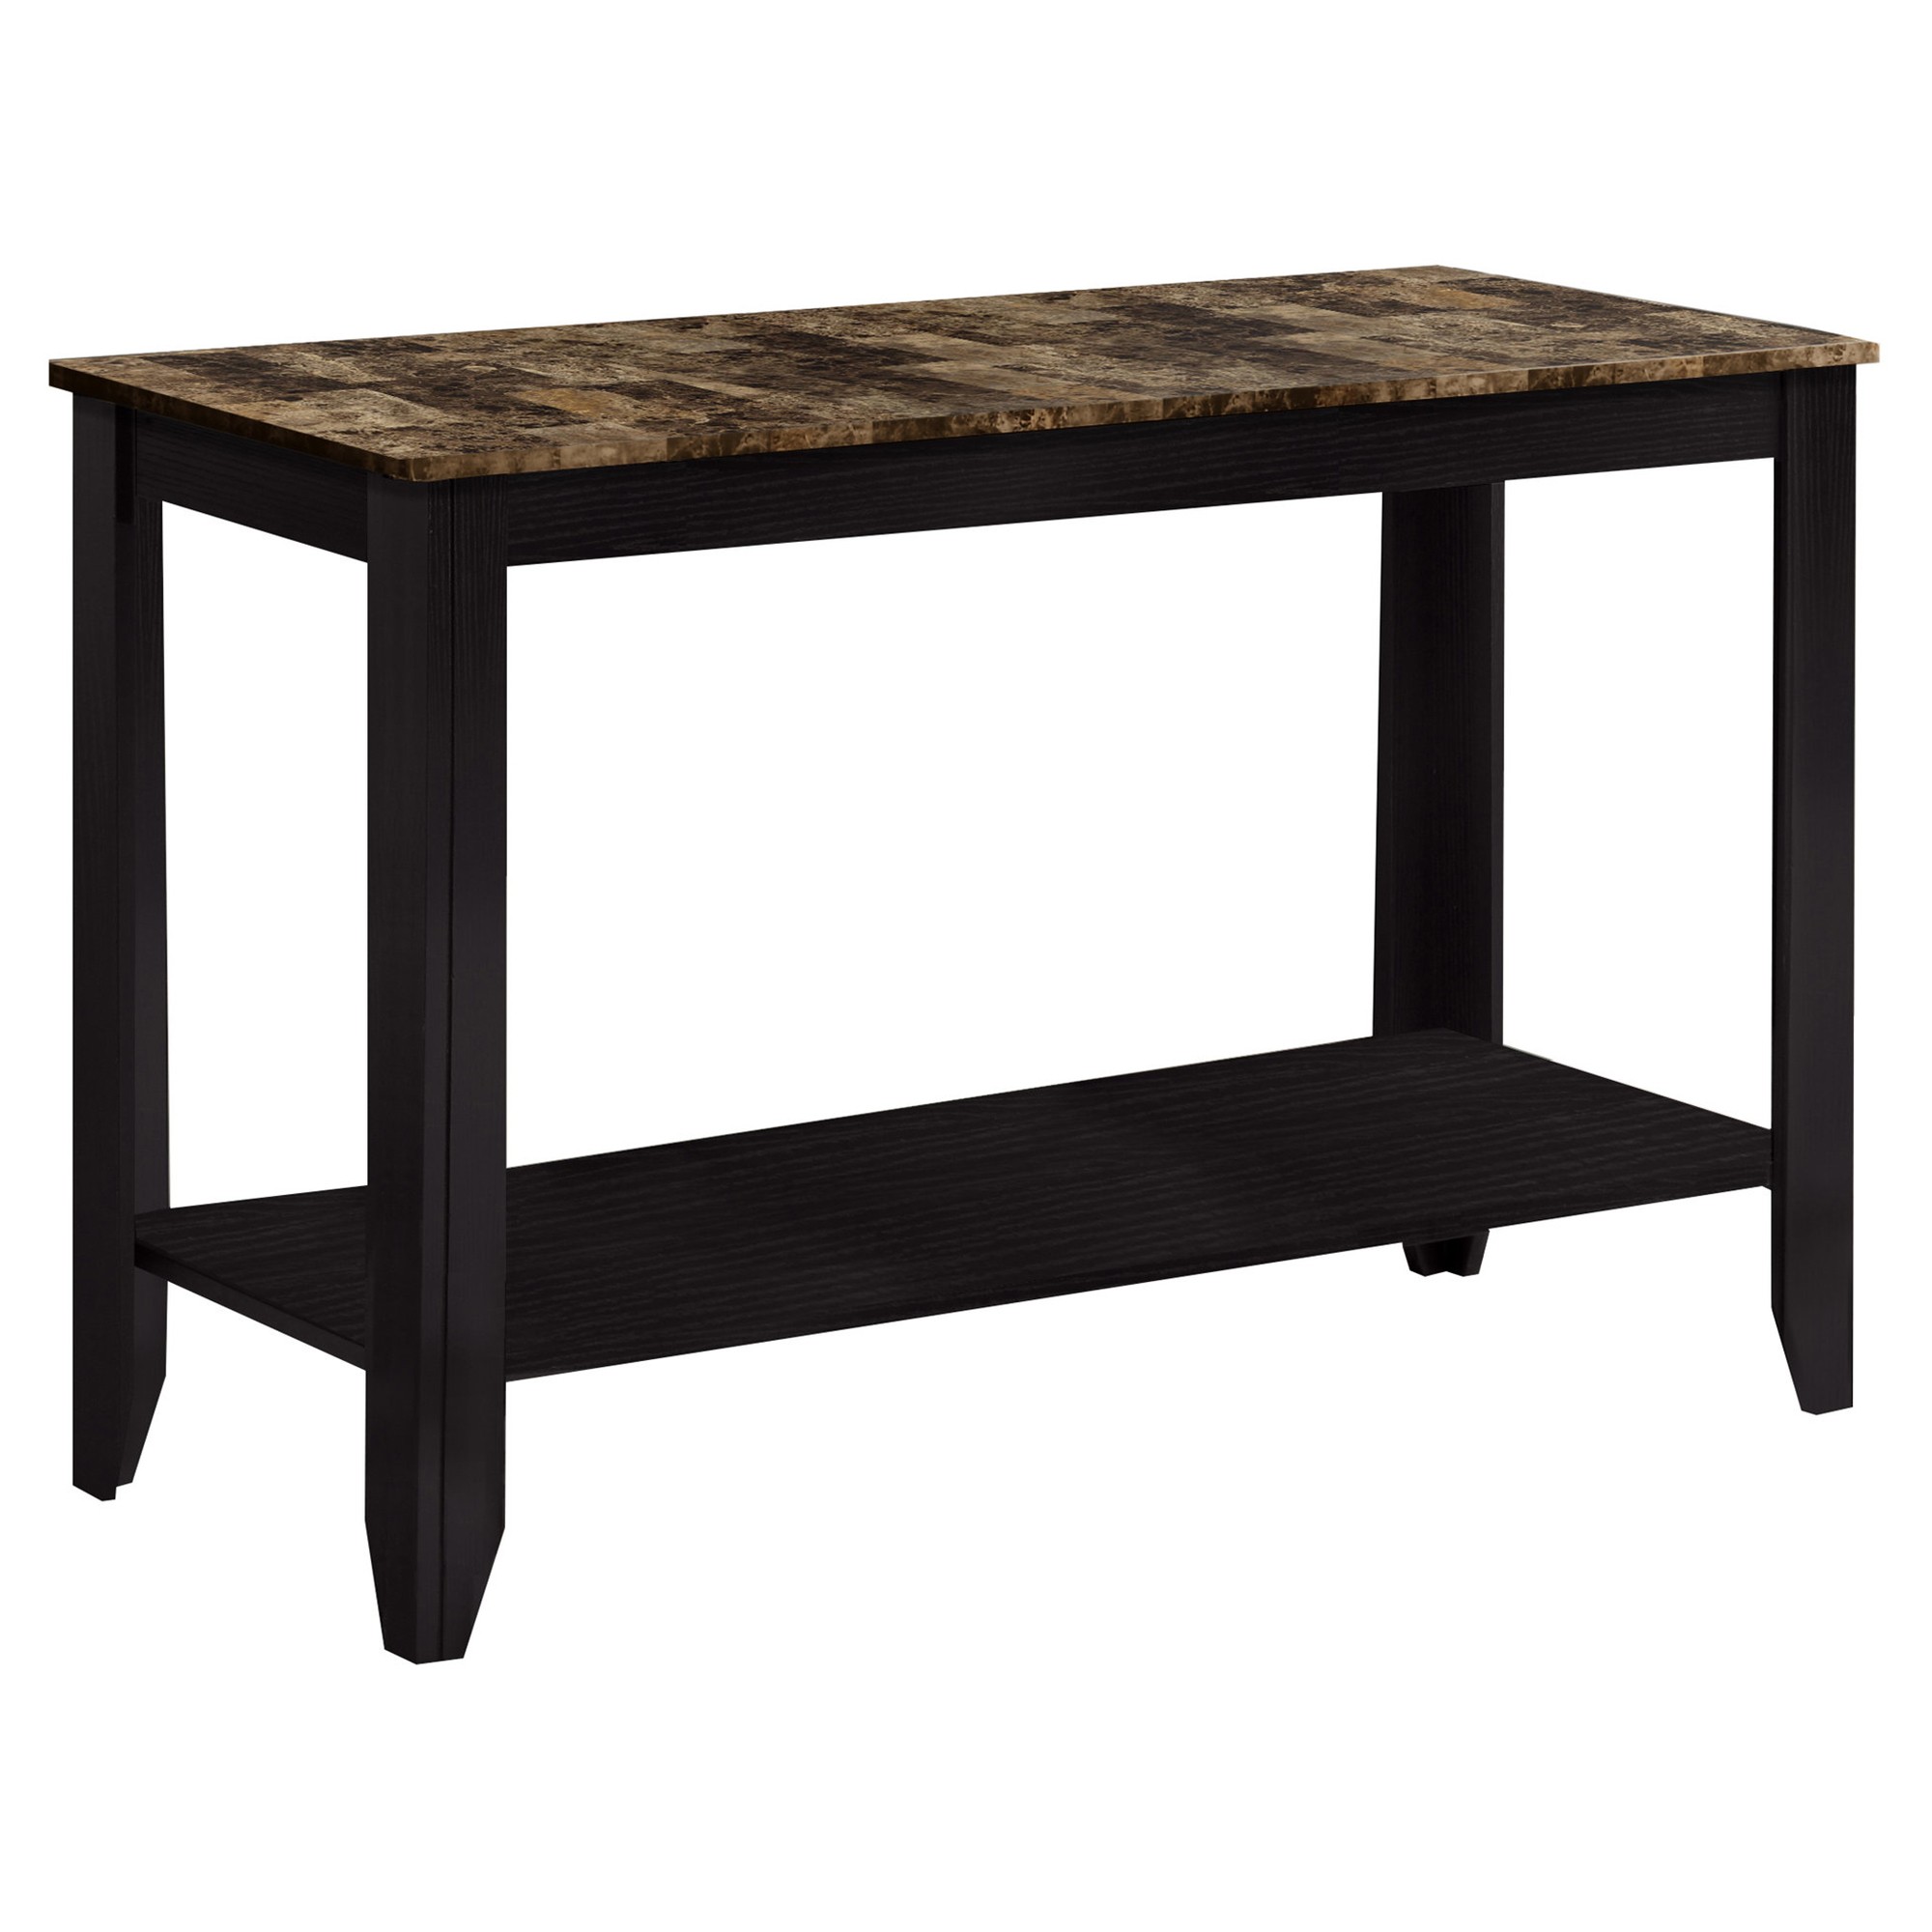 ACCENT TABLE - 44"L / CAPPUCCINO MARBLE TOP